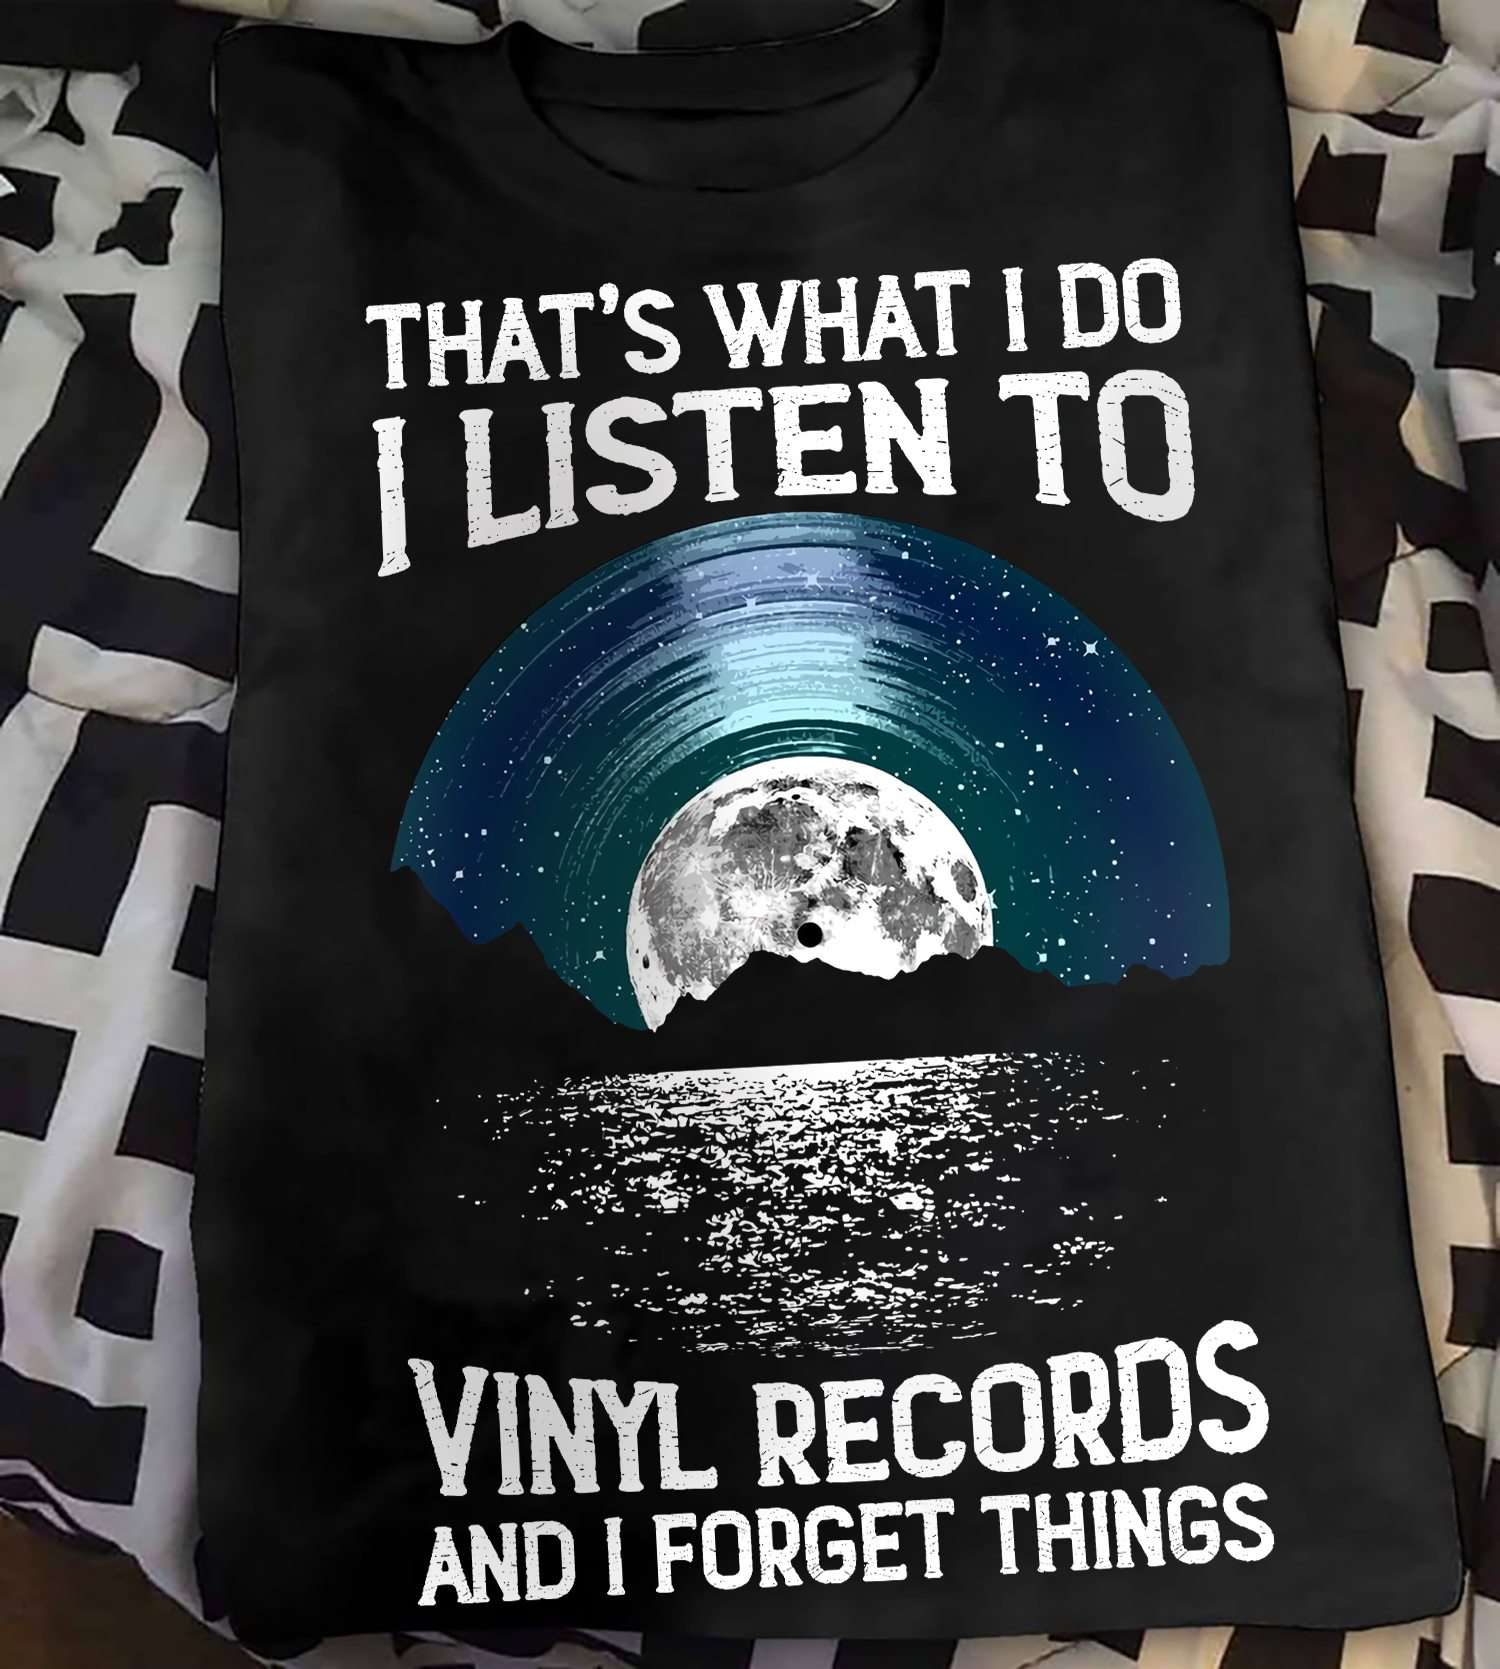 Moon Vinyl Records - That's what i do i listen to vinyl records and i forget things